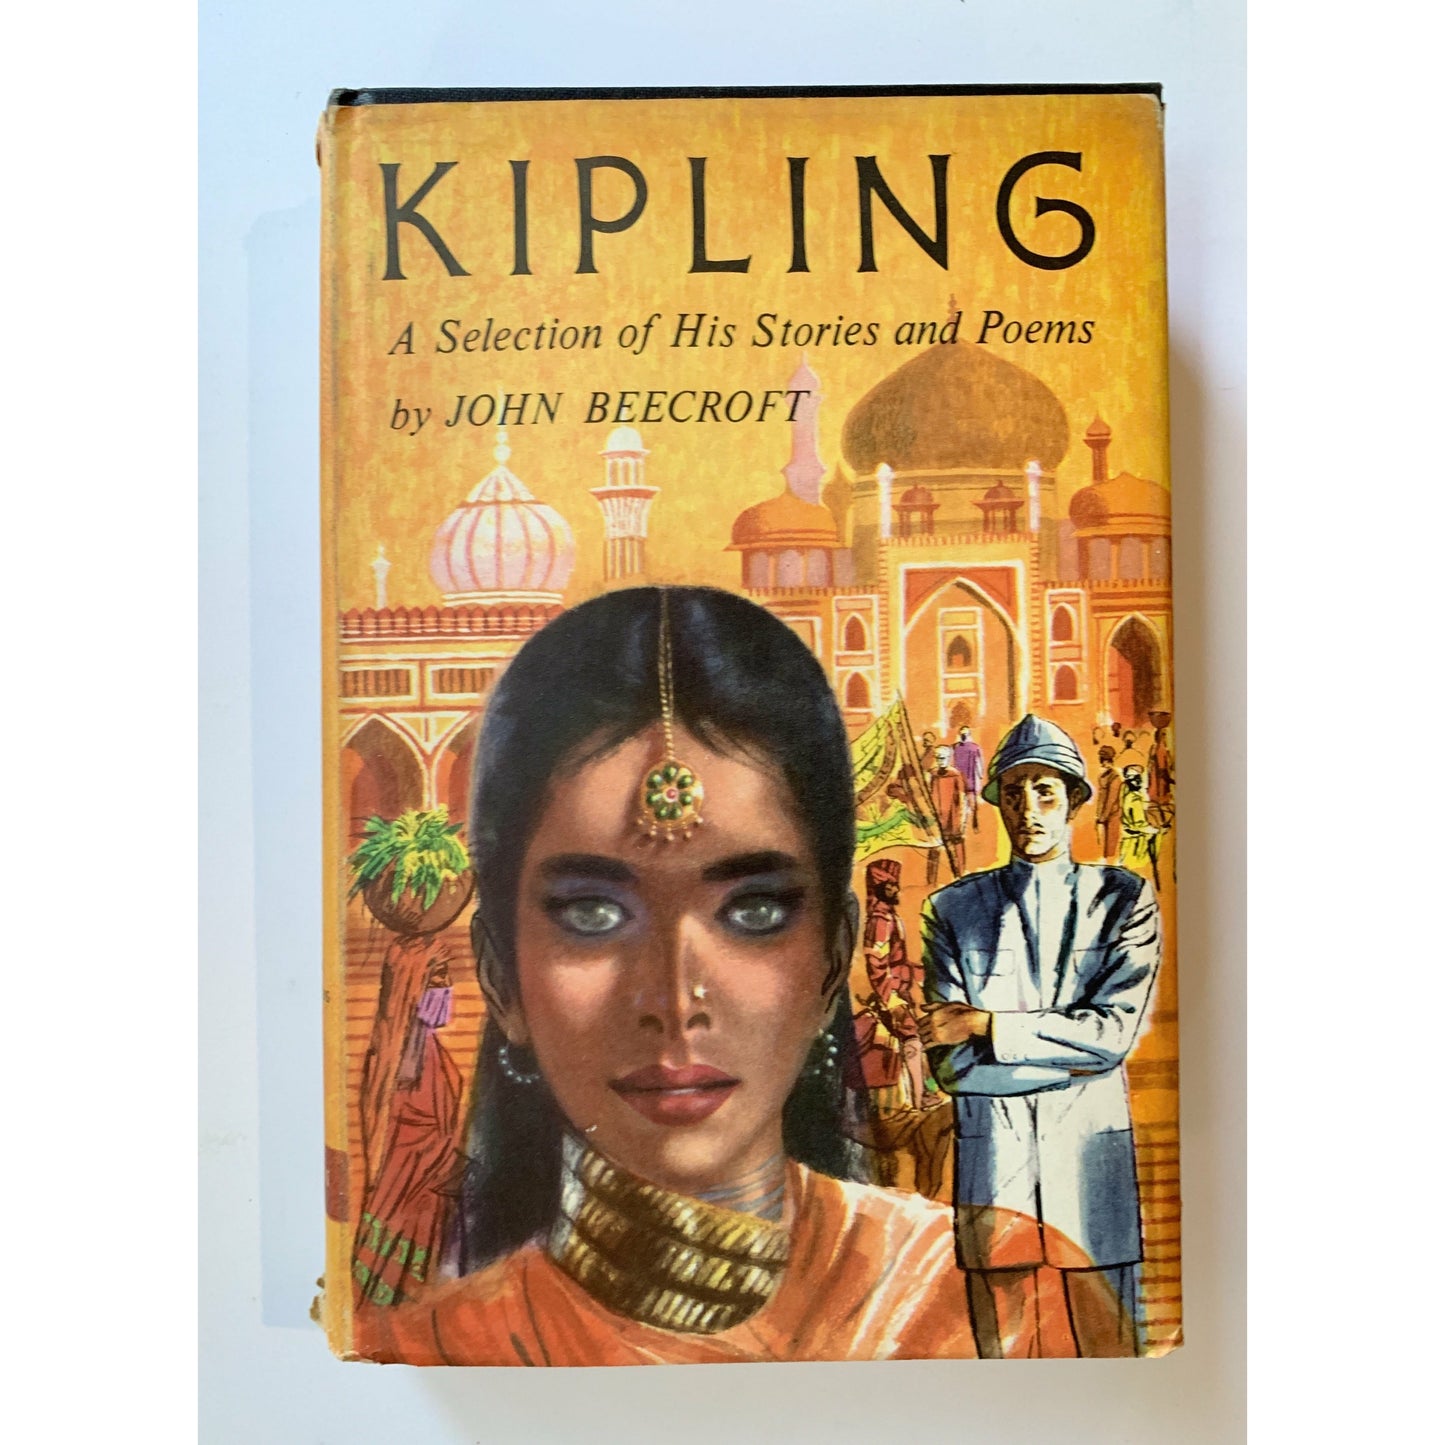 Kipling: A Selection of His Stories and Poems Two Volume Hardcover Set 1956